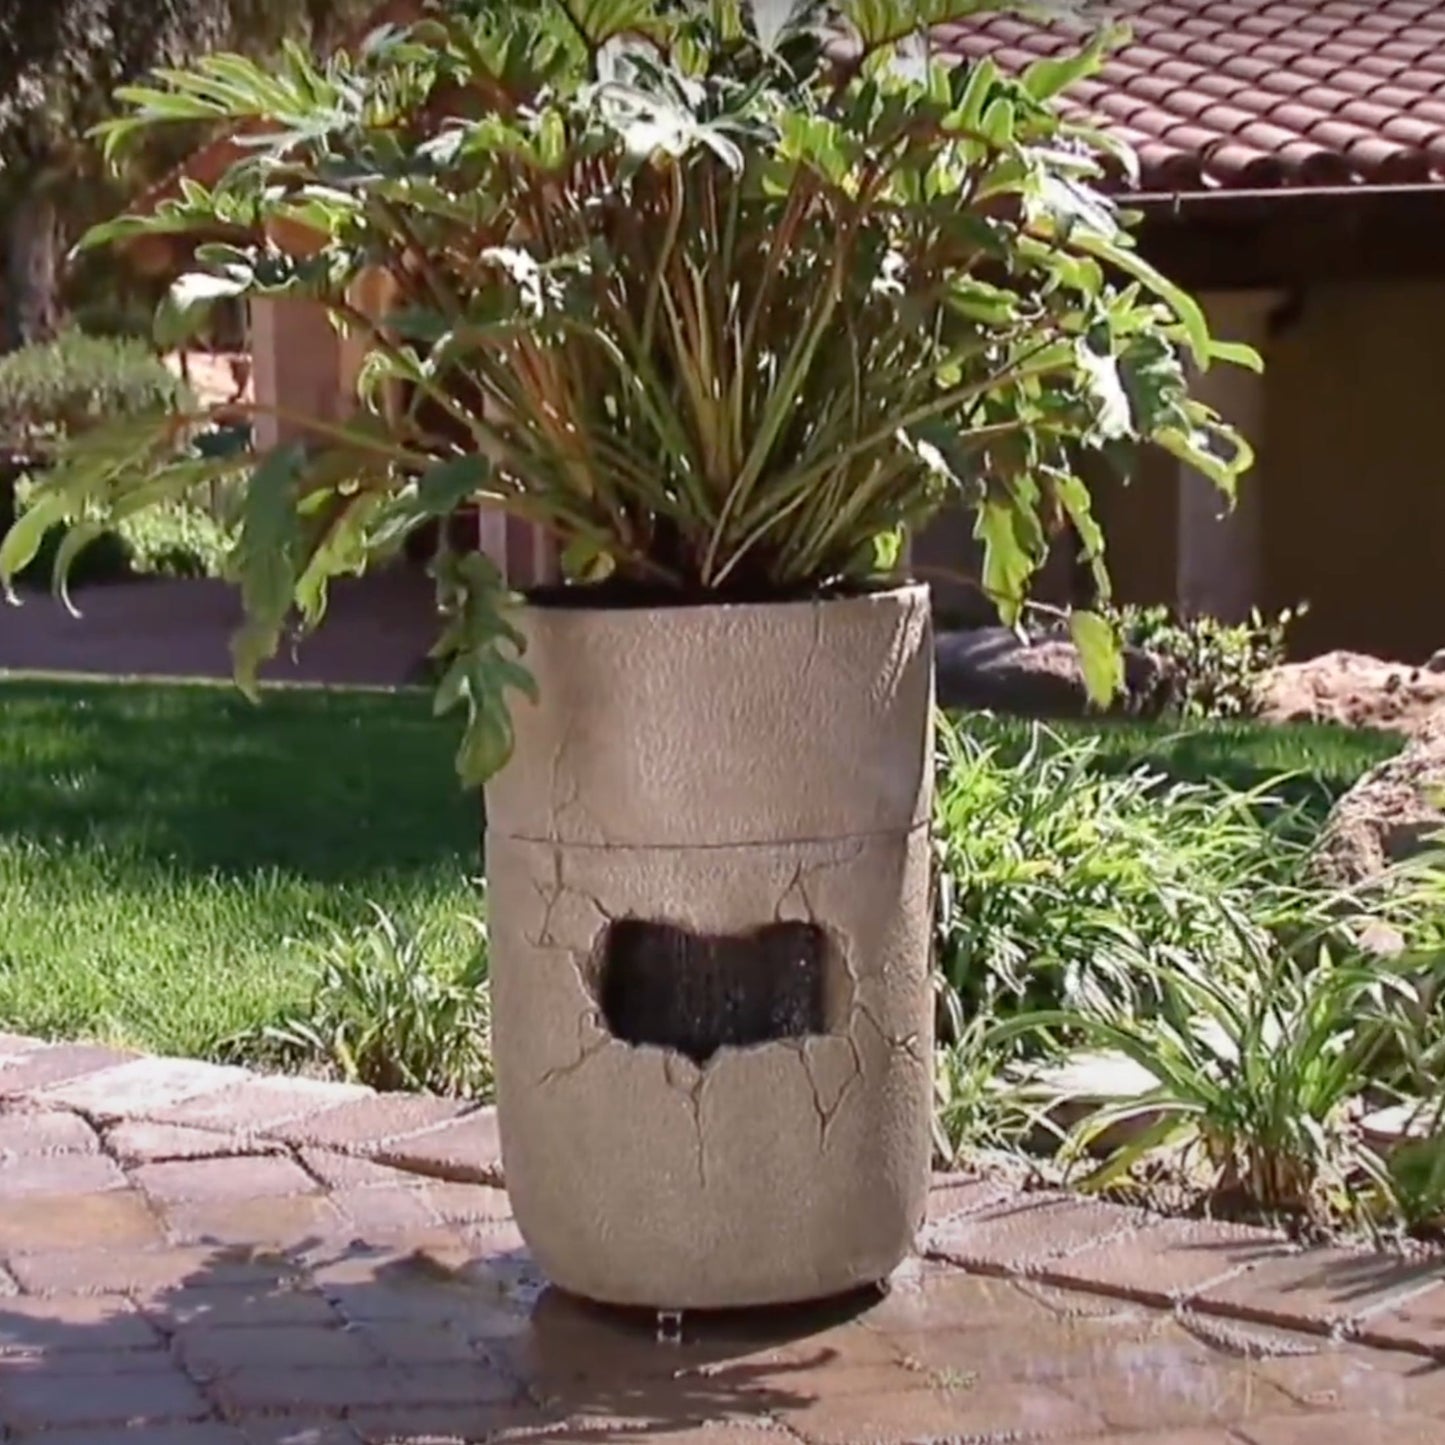 Rain Shower Fountain and Self-Watering Planter